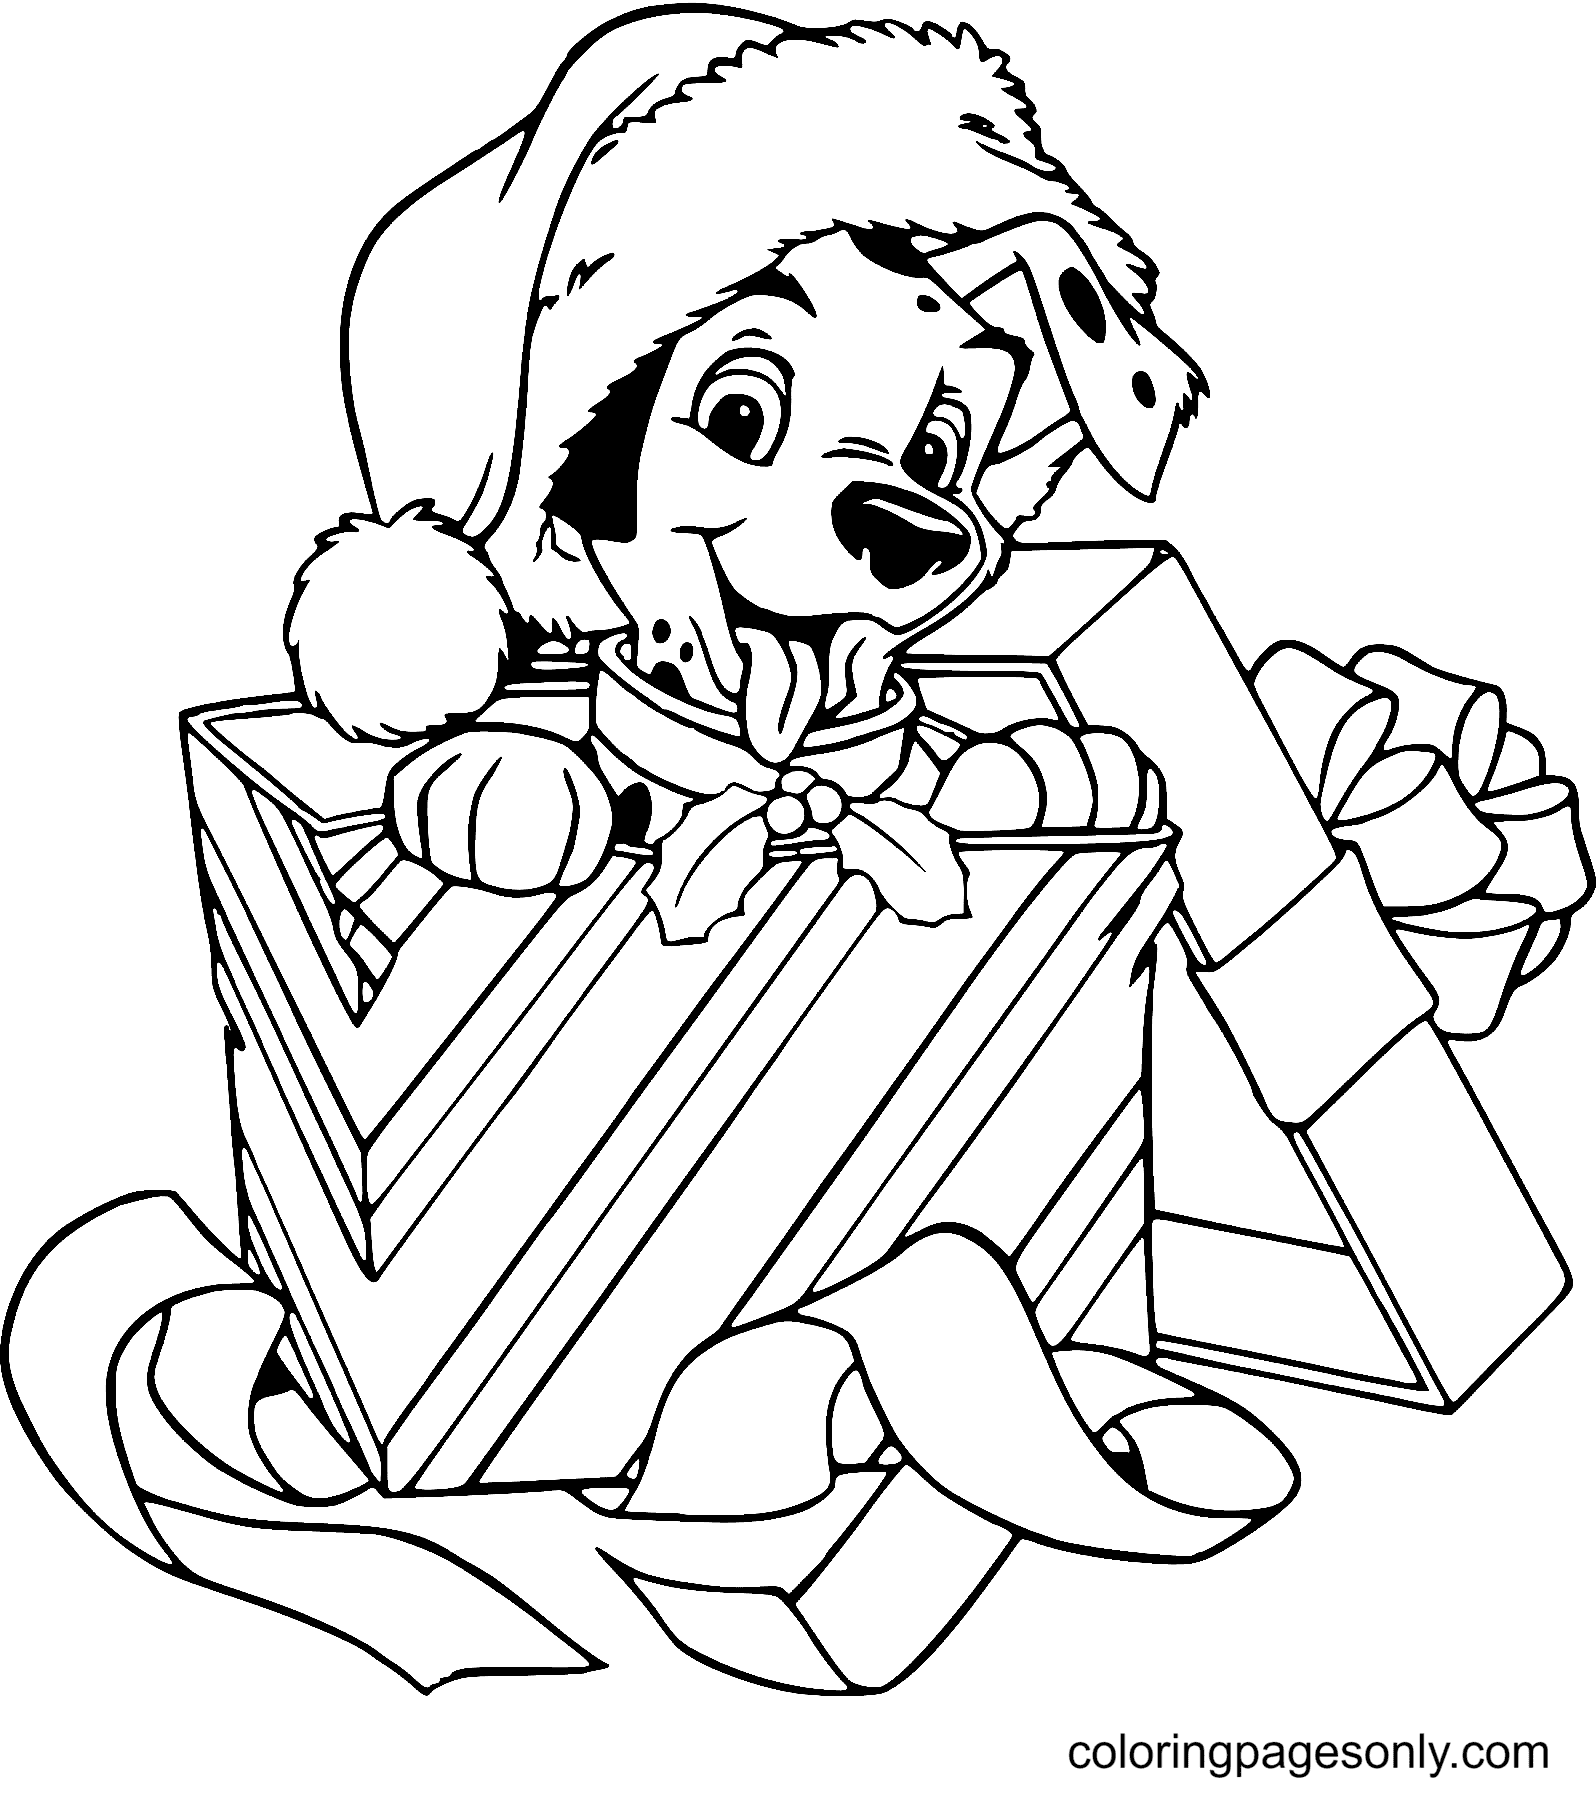 Puppy Wearing Santa Hat in Gift Box Coloring Page